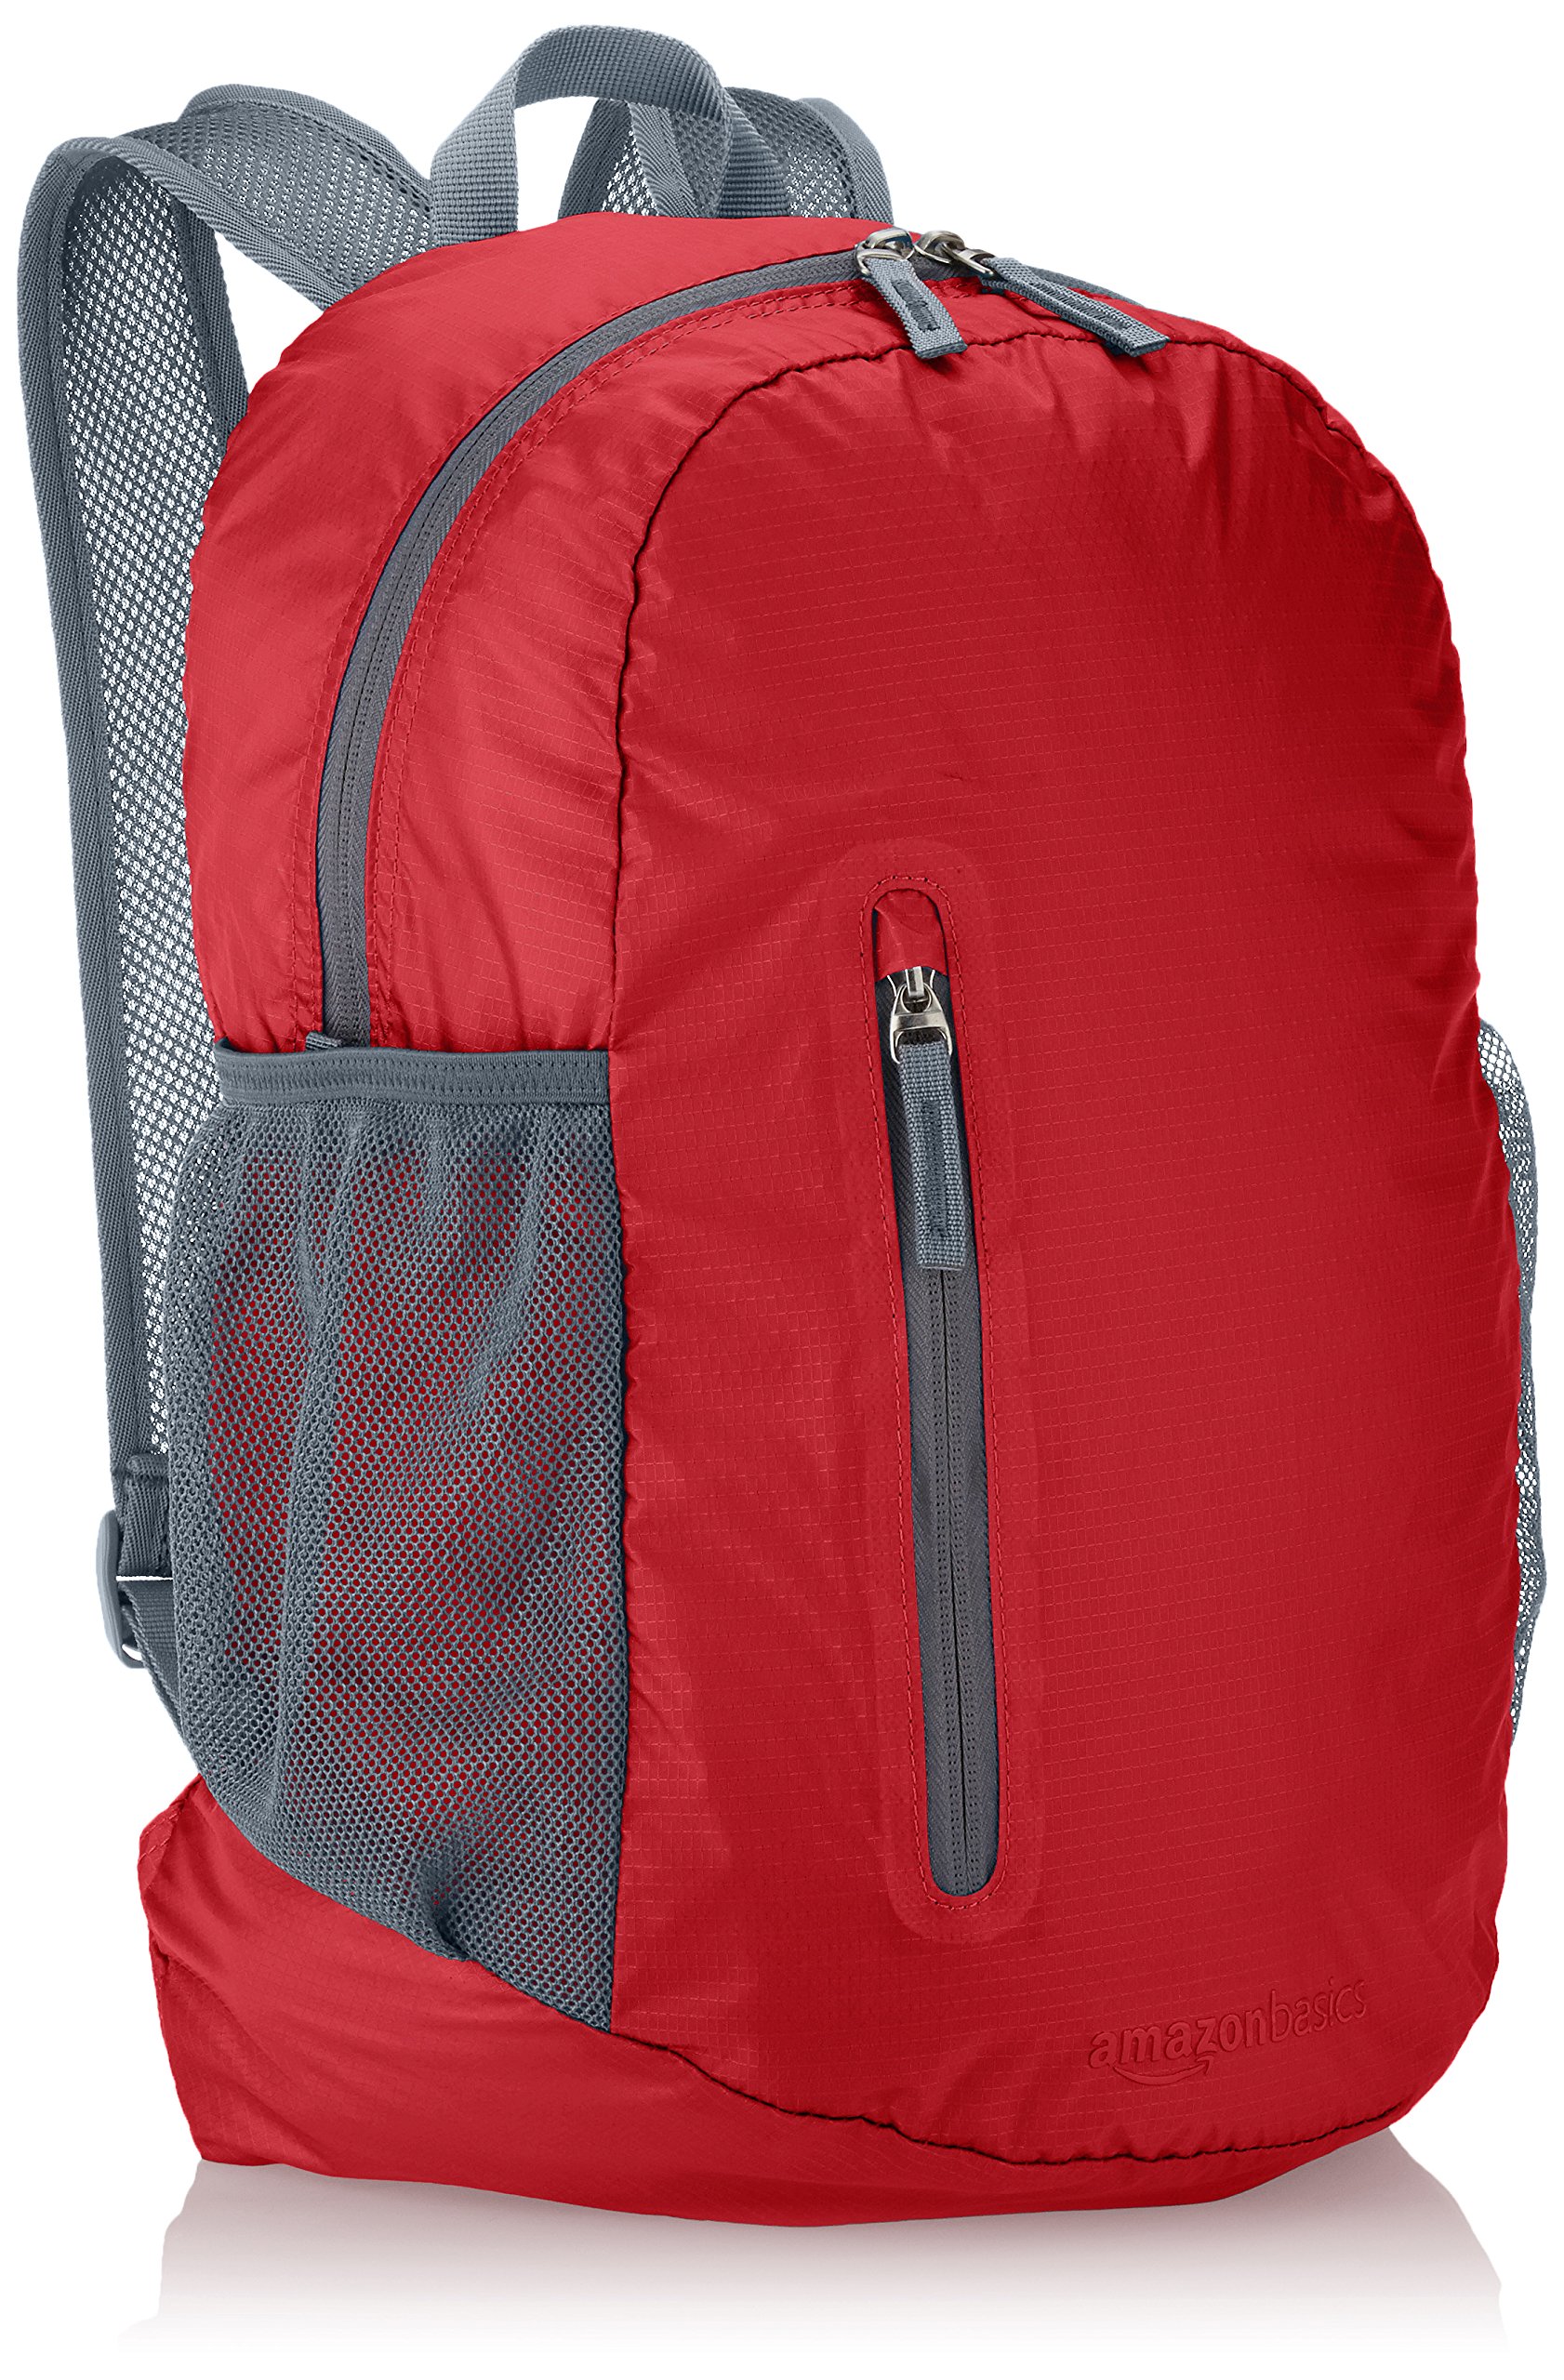 $8.30: Amazon Basics Ultralight Portable Packable Day Pack (Prime Members)